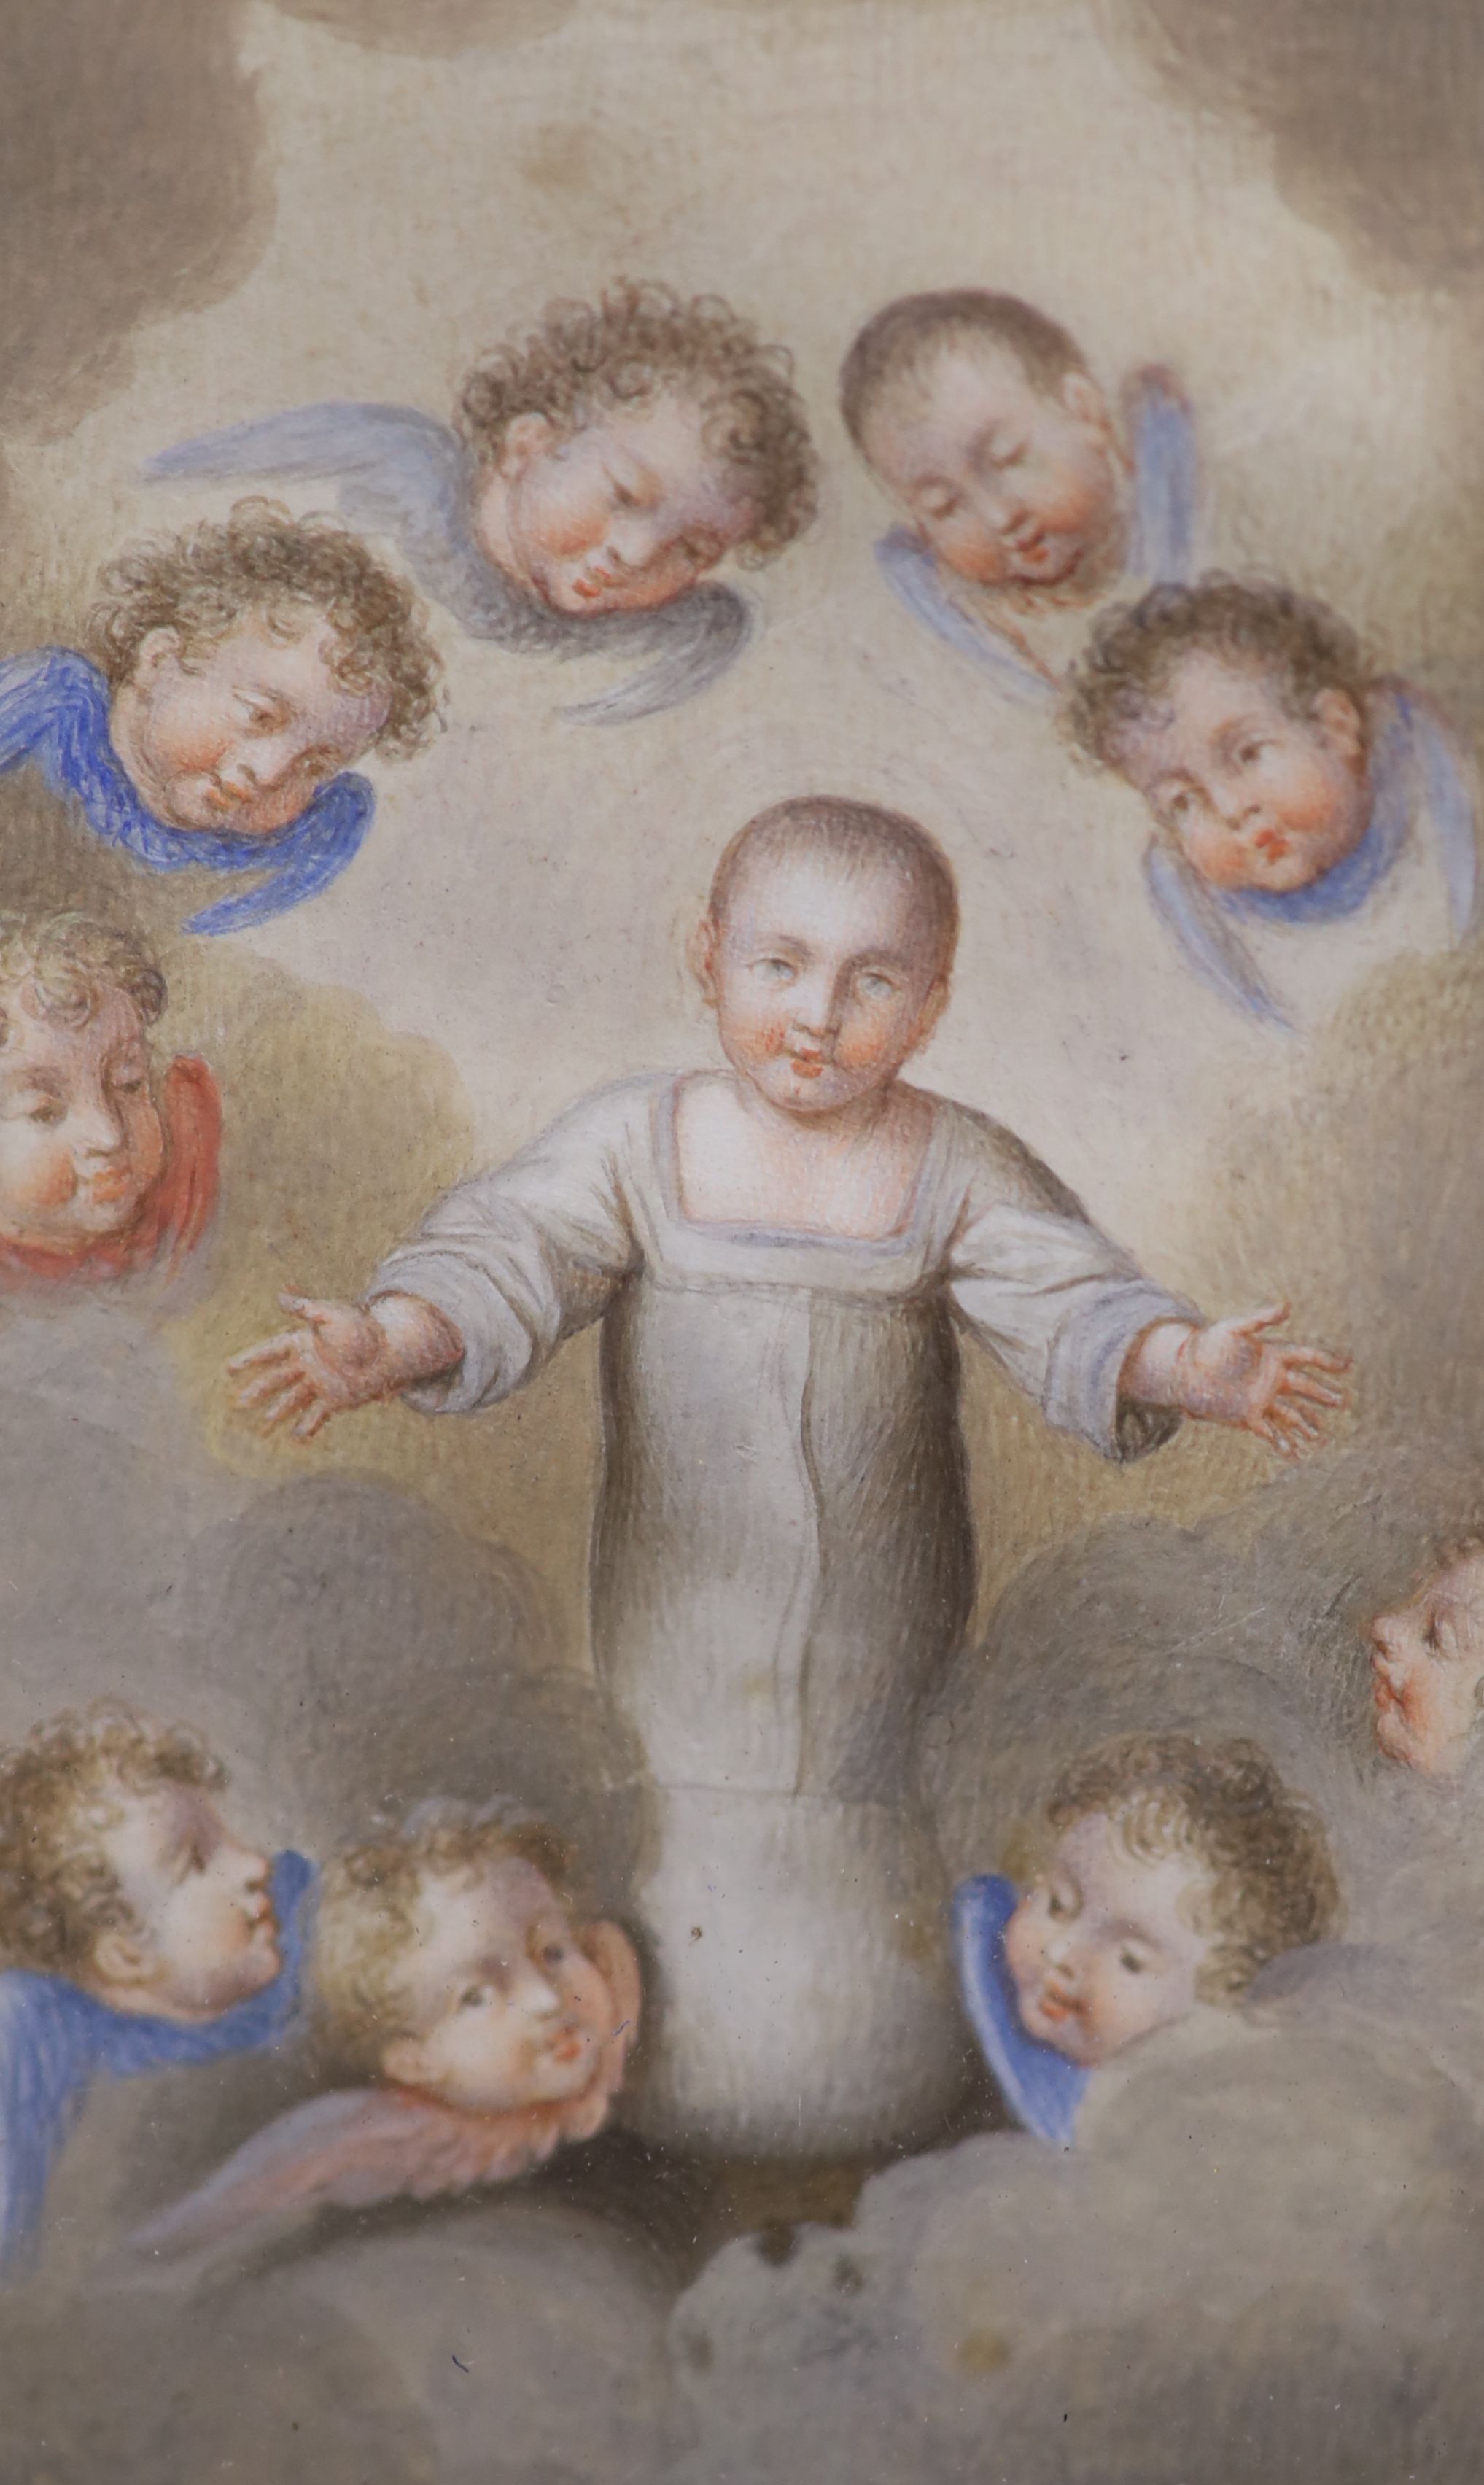 A watercolour on vellum, Christ in swaddling clothes attended by angels, label reads Italian 1620, 9 x5.5cm.